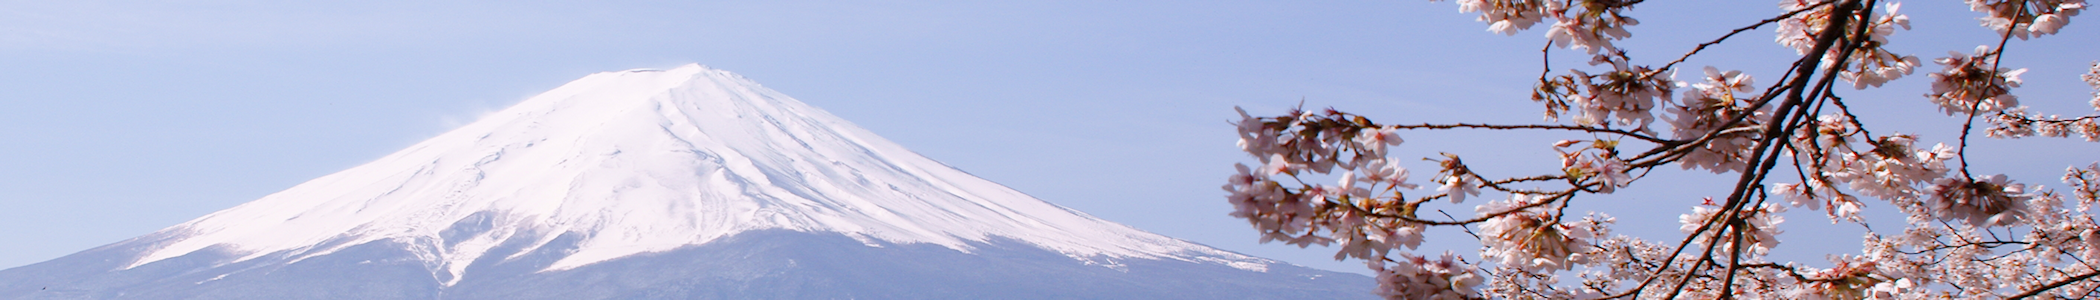 Mount_Fuji_banner_Fuji_and_cherry_blossoms.png